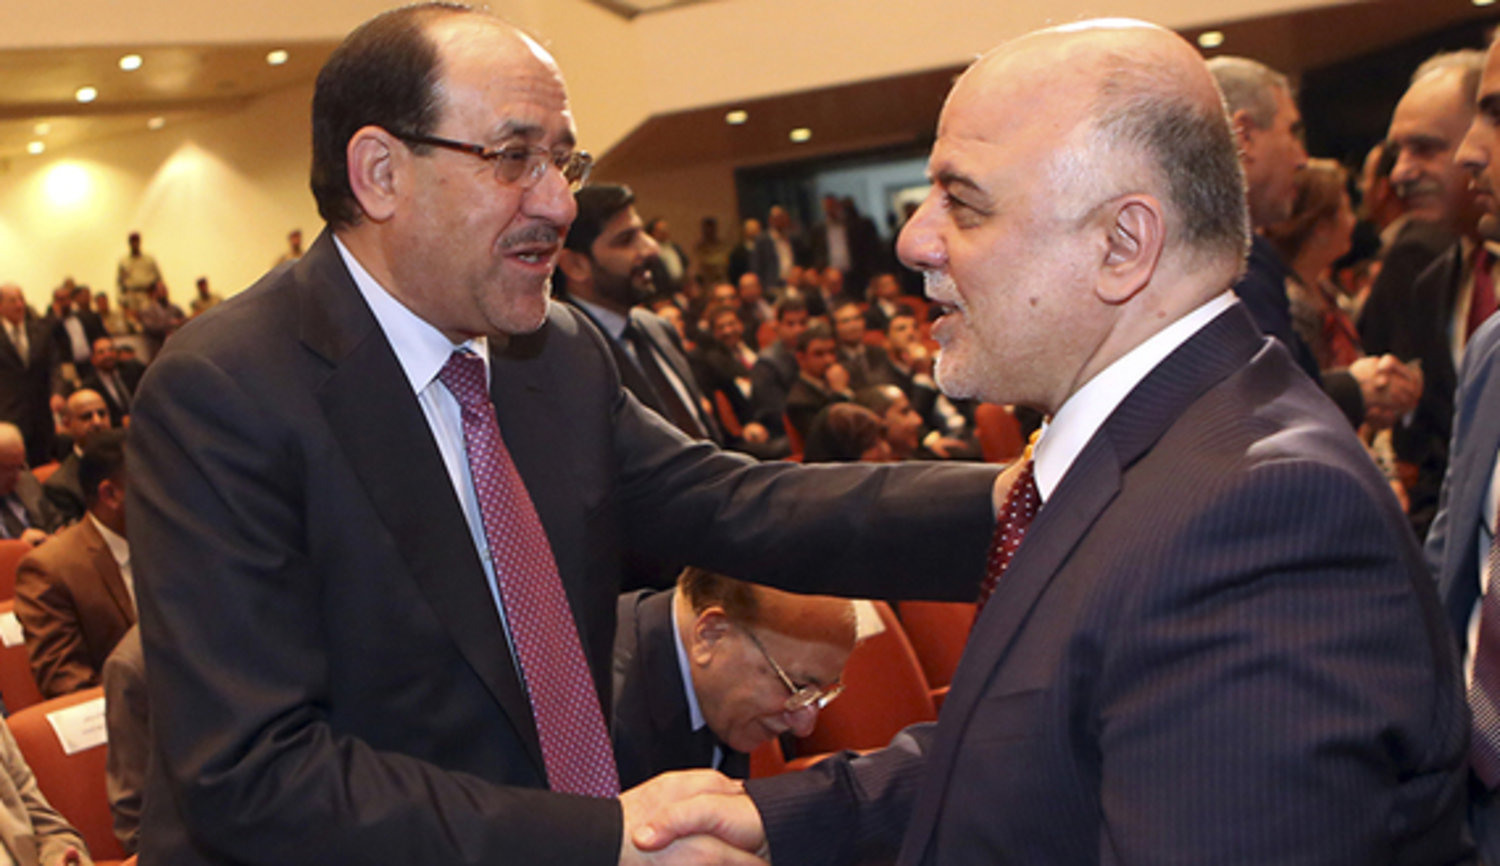 Iraq's Vice President Nouri al-Maliki (L) and new Prime Minister Haider al-Abadi shake hands during the session to approve the new government in Baghdad, Sept. 8, 2014. (crédit photo:  REUTERS/Hadi Mizban)
